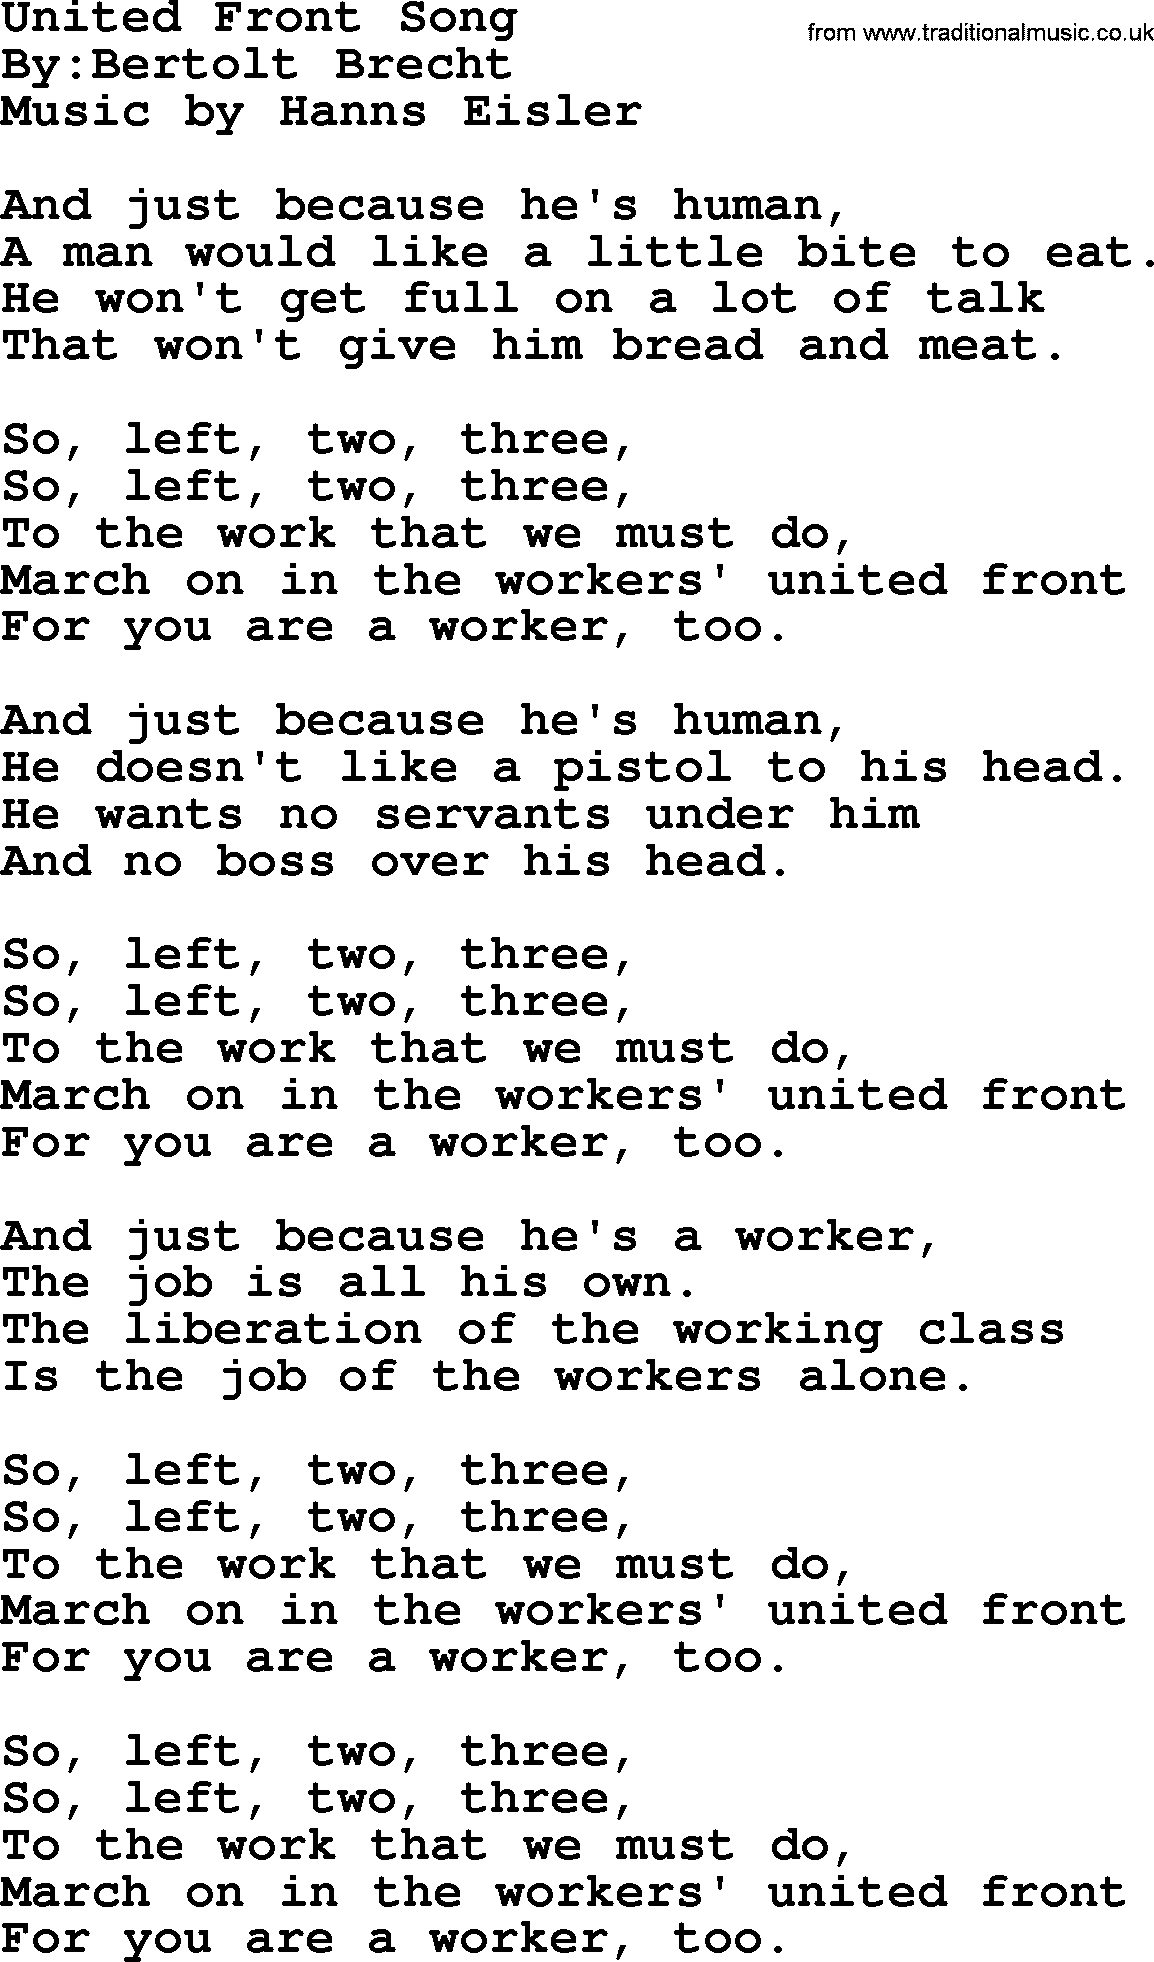 Political, Solidarity, Workers or Union song: United Front Song, lyrics